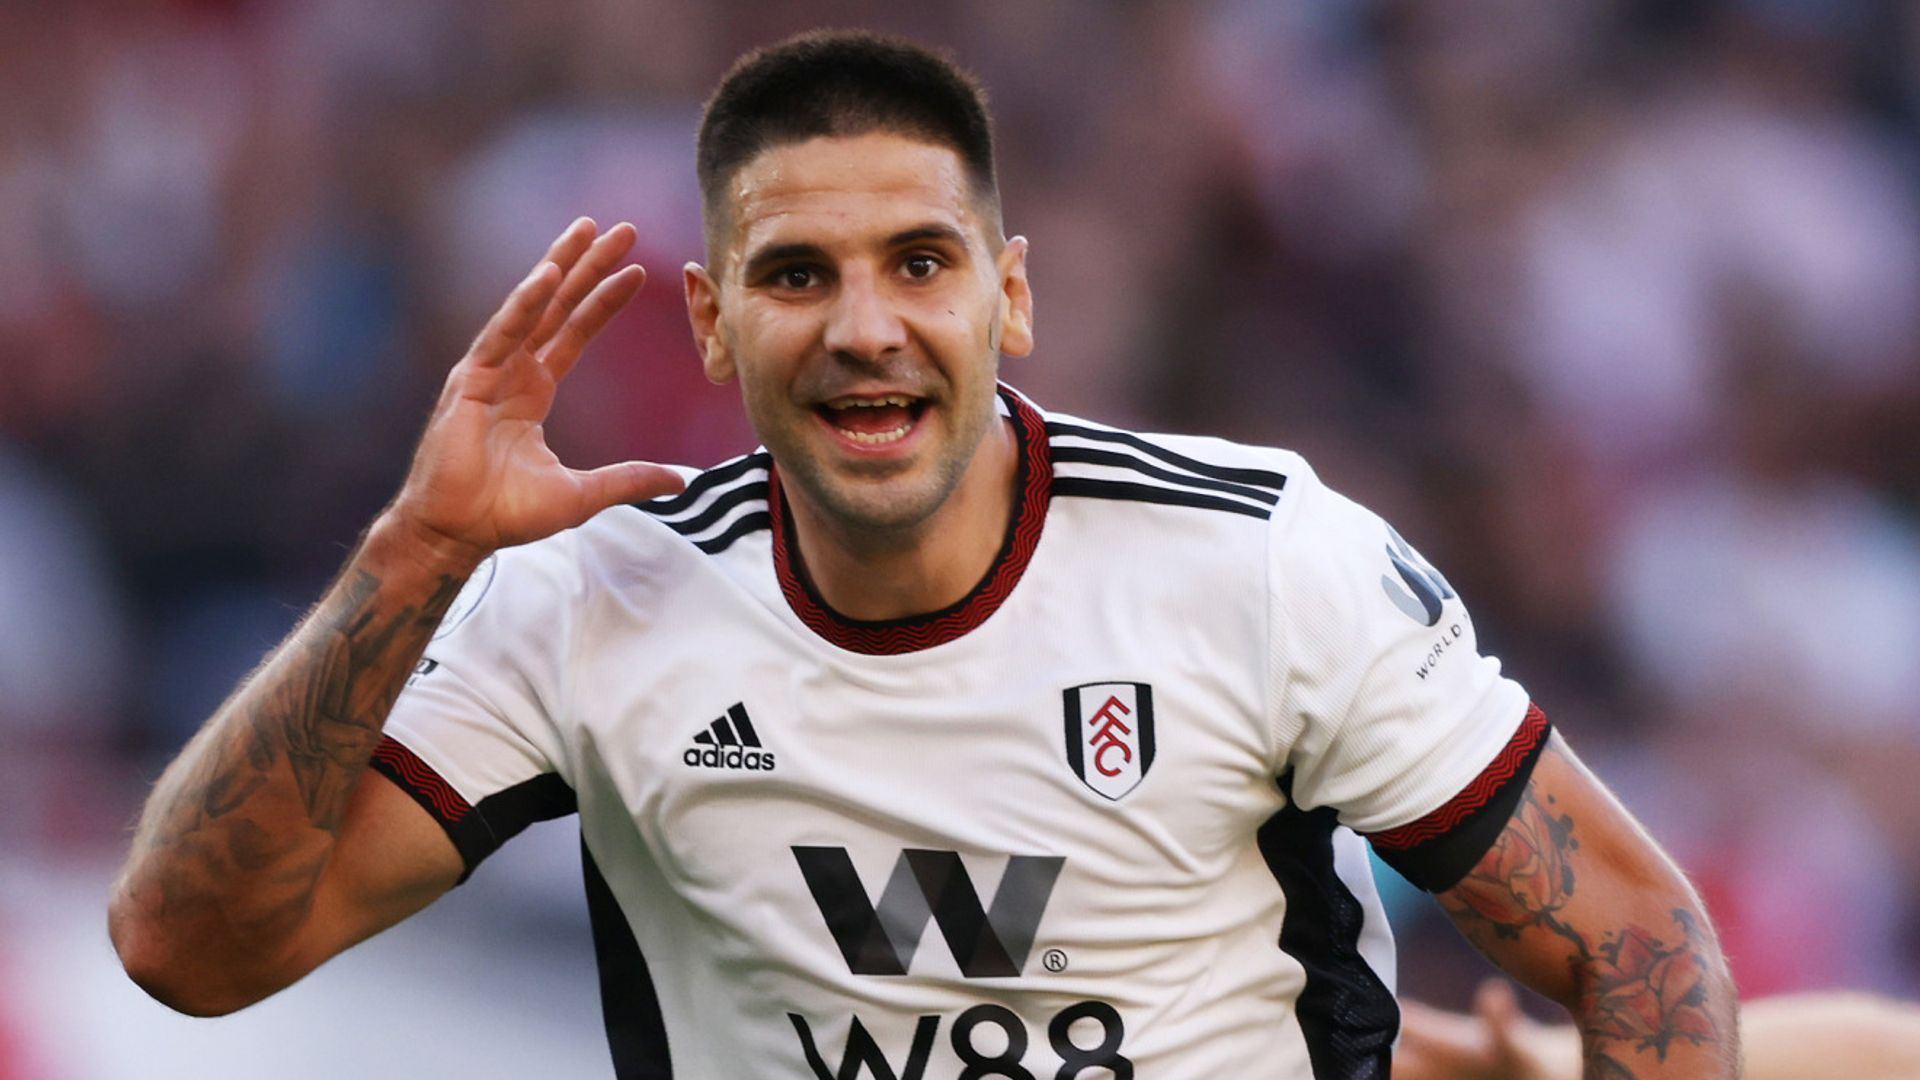 Jones Knows best bets - Back 8/1 Mitrovic to score a header